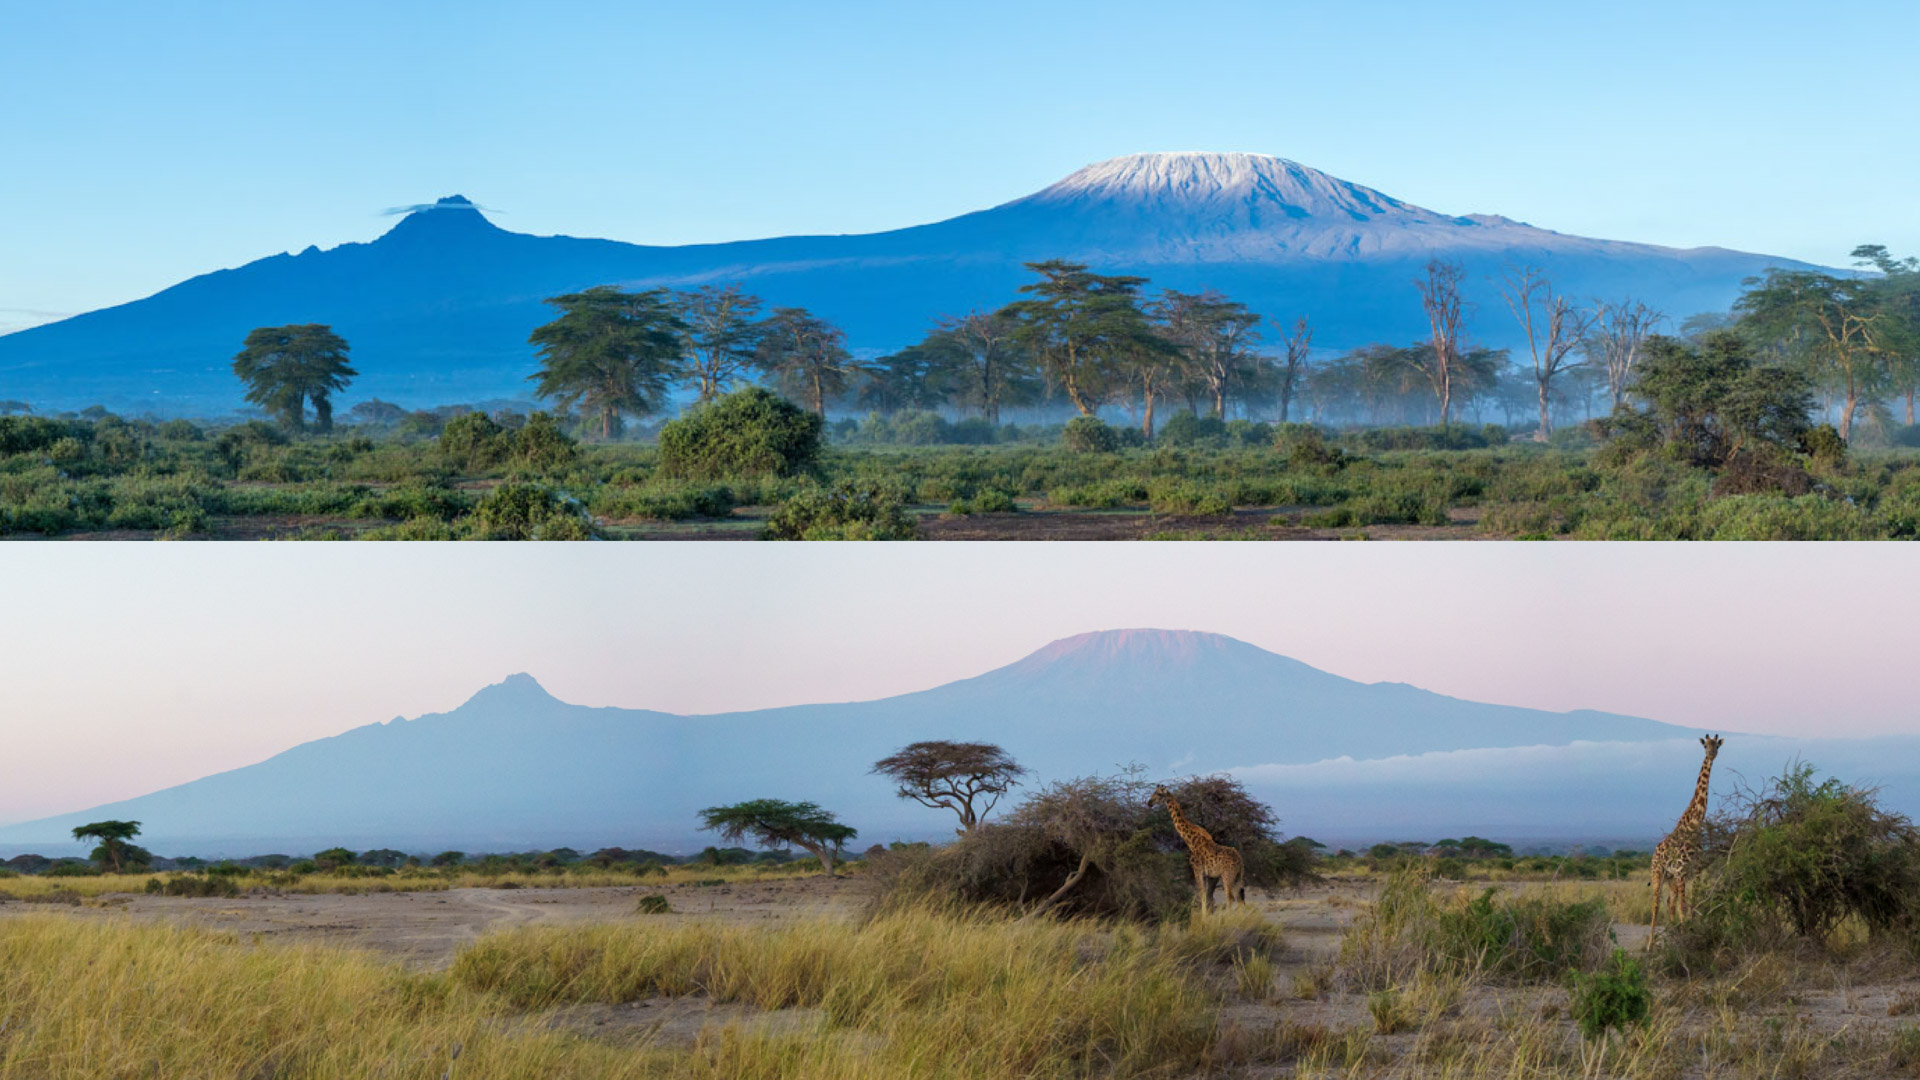 Above: Panoramic mode is perfect for capturing Kili